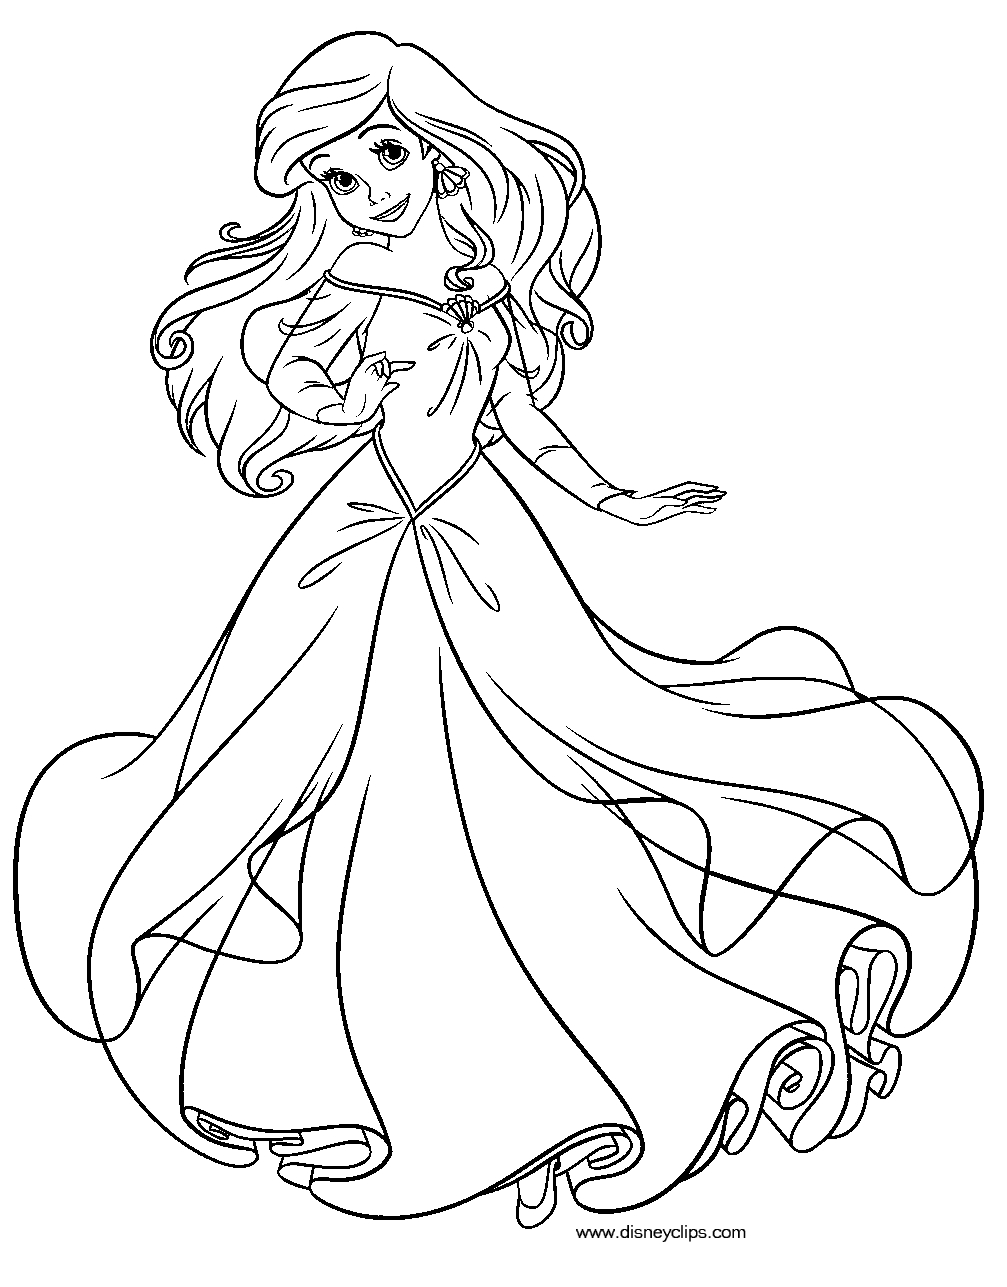 Ariel Printable Coloring Pages Coloring Pages For Kids Disney Ariel Printable Coloring Page For Kids